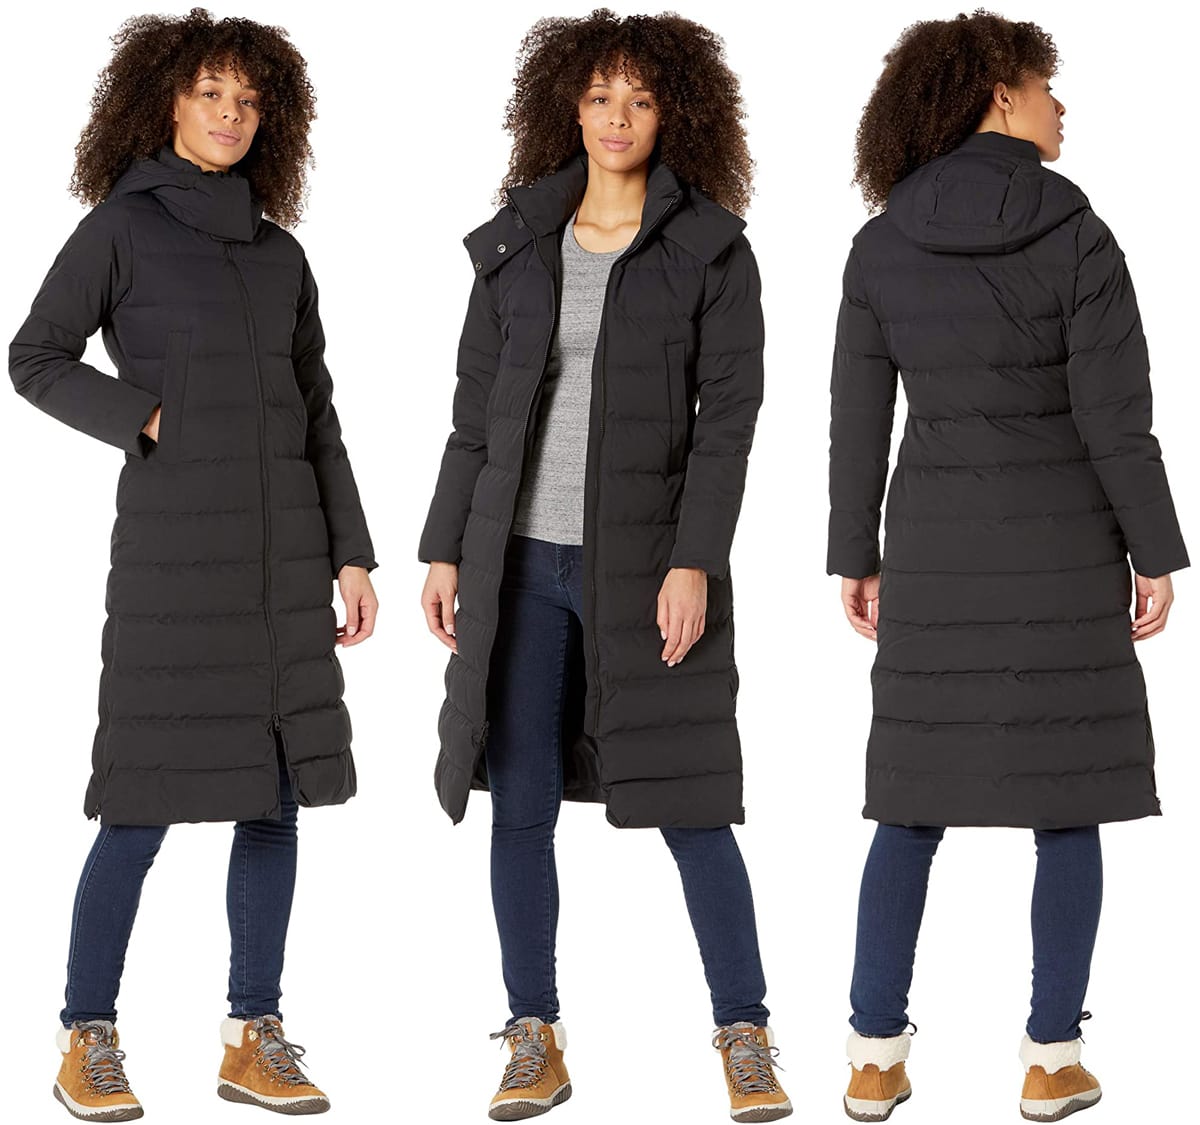 The Prospect coat has a long silhouette that features Marmot MemBrain 2-layer waterproof/breathable fabric and 800-fill-power-down insulation finished with a moisture-resistant Down Defender treatment